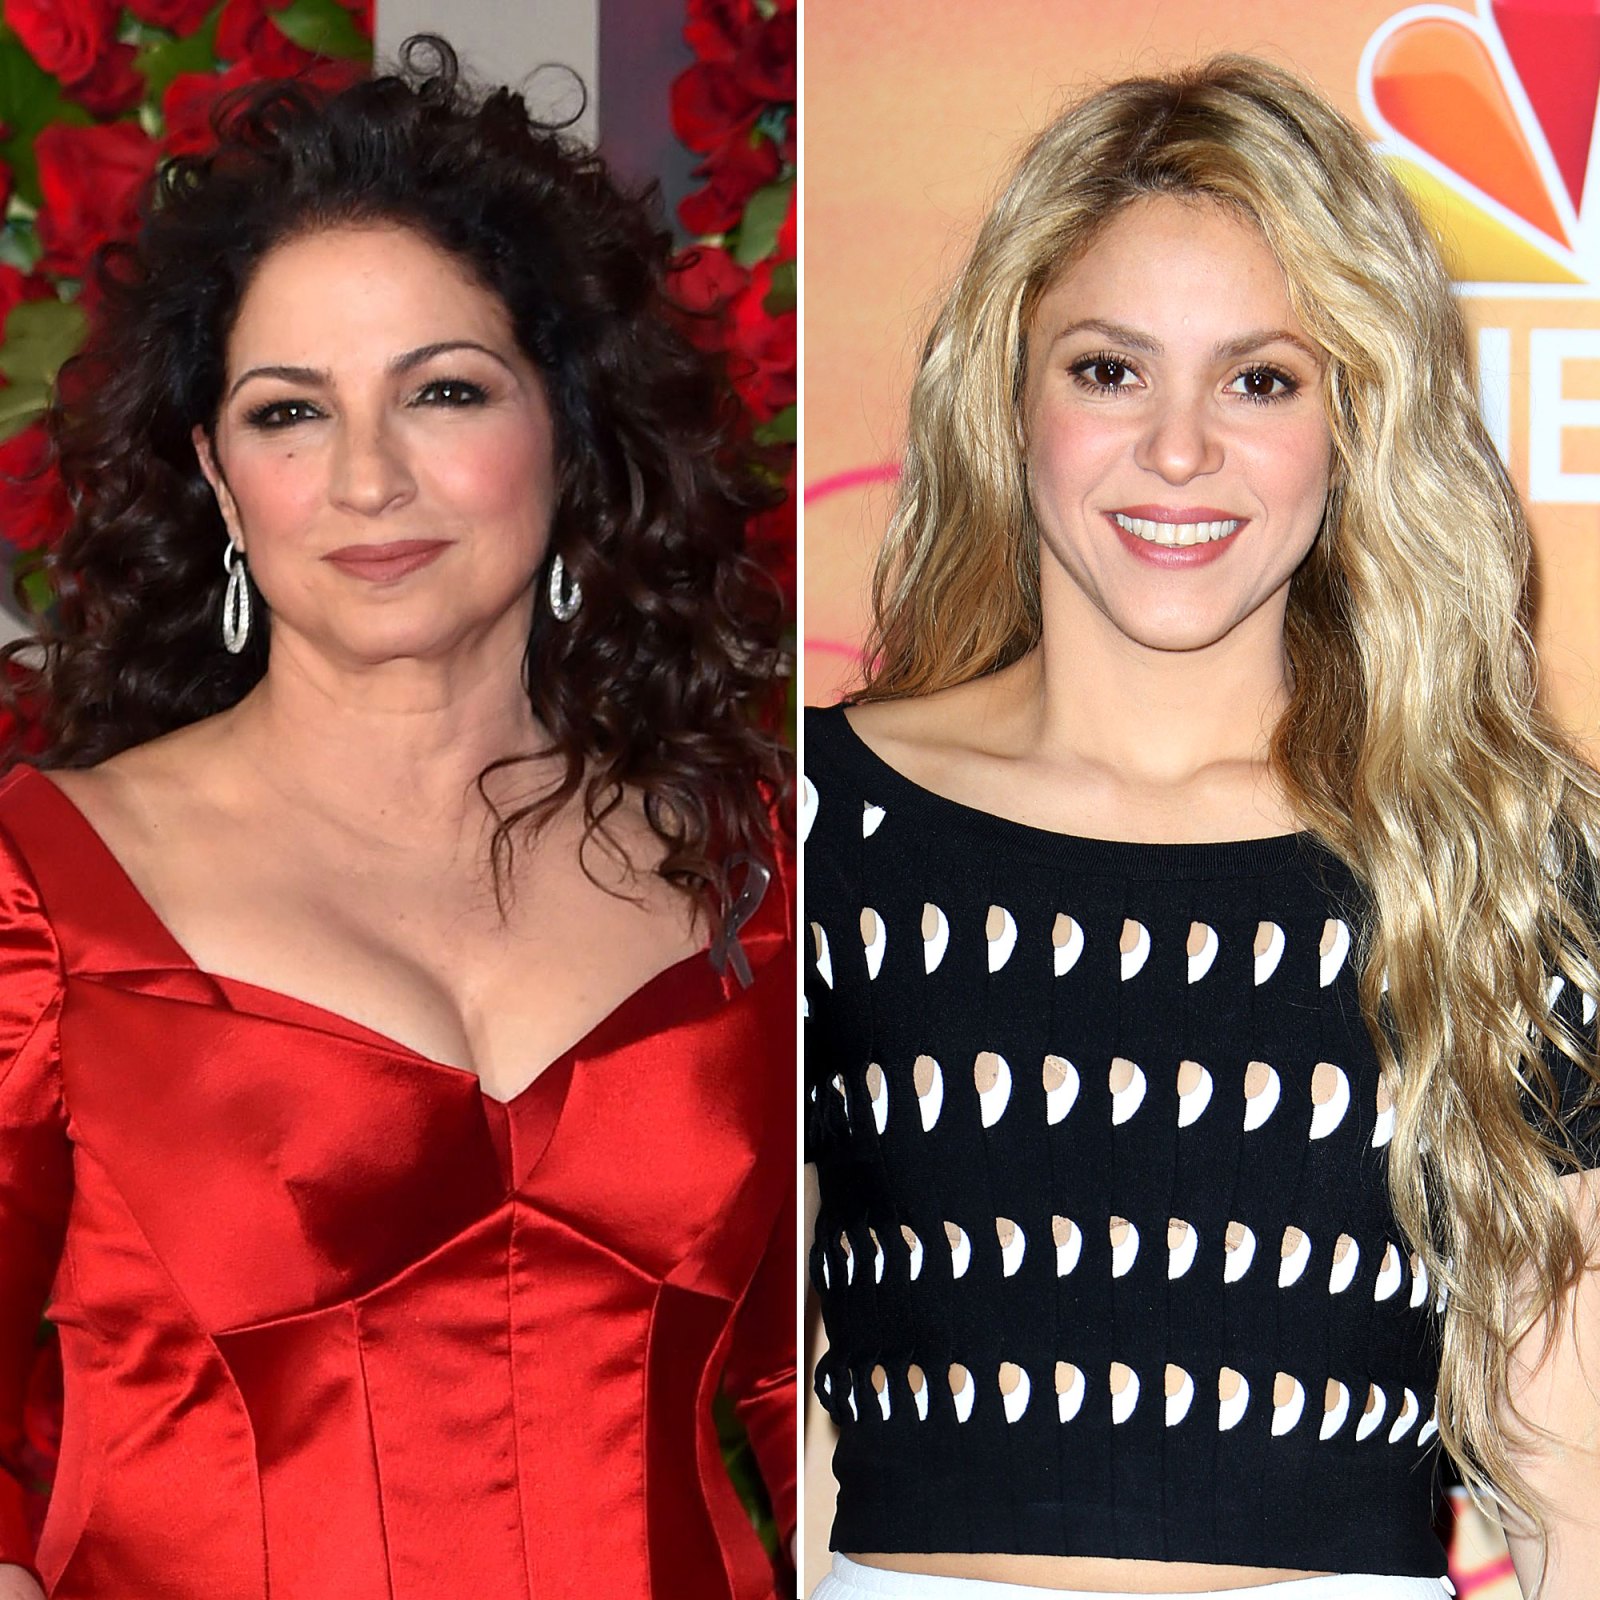 How Did Gloria Support Shakira Gloria Estefan History With Jennifer Lopez and Shakira Through the Years Explained